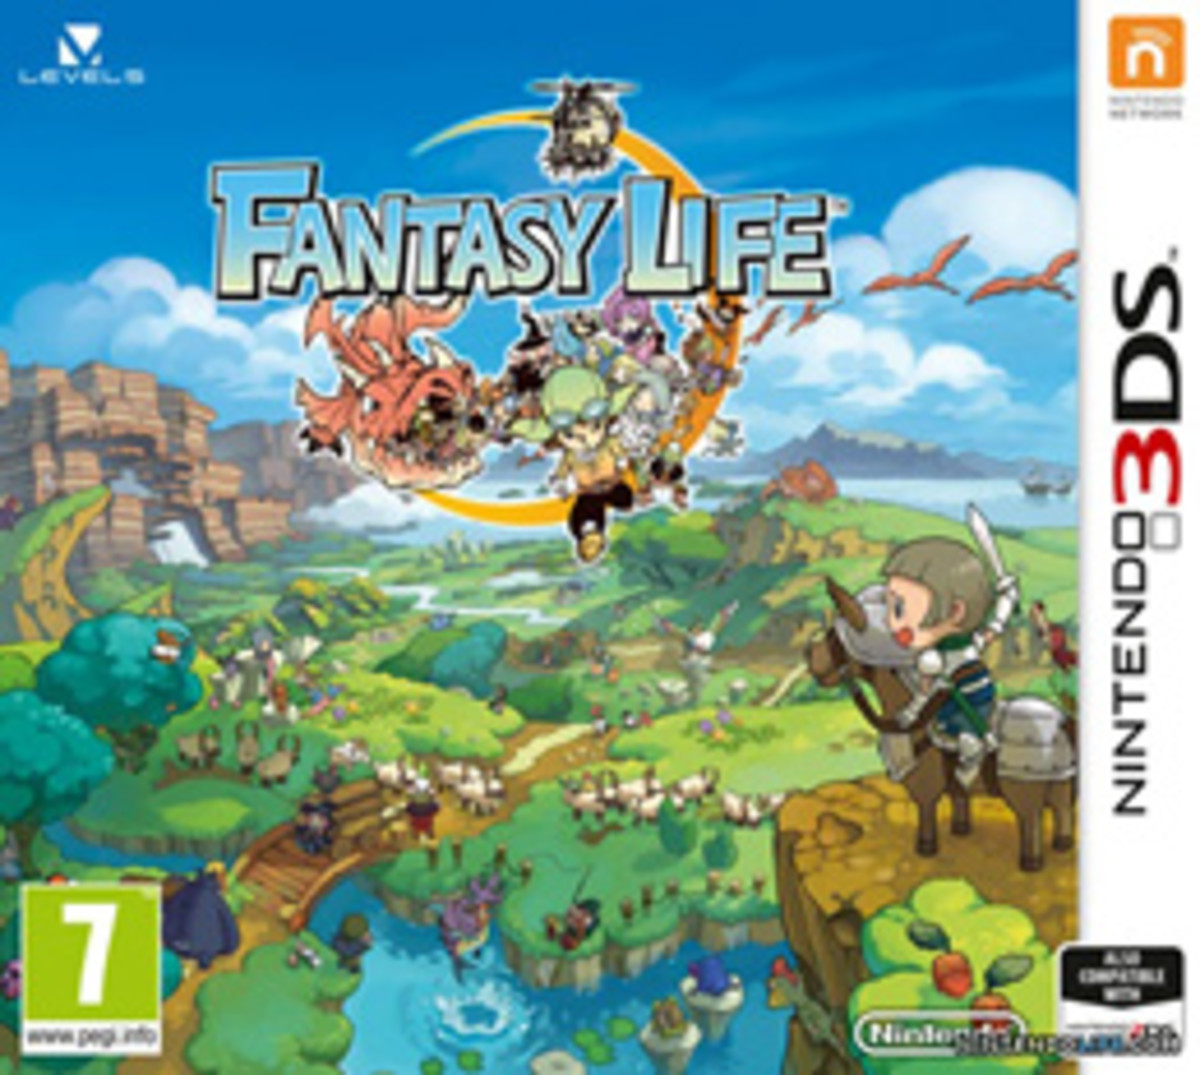 Fantasy Life 3DS by Level 5: A Beginners Guide